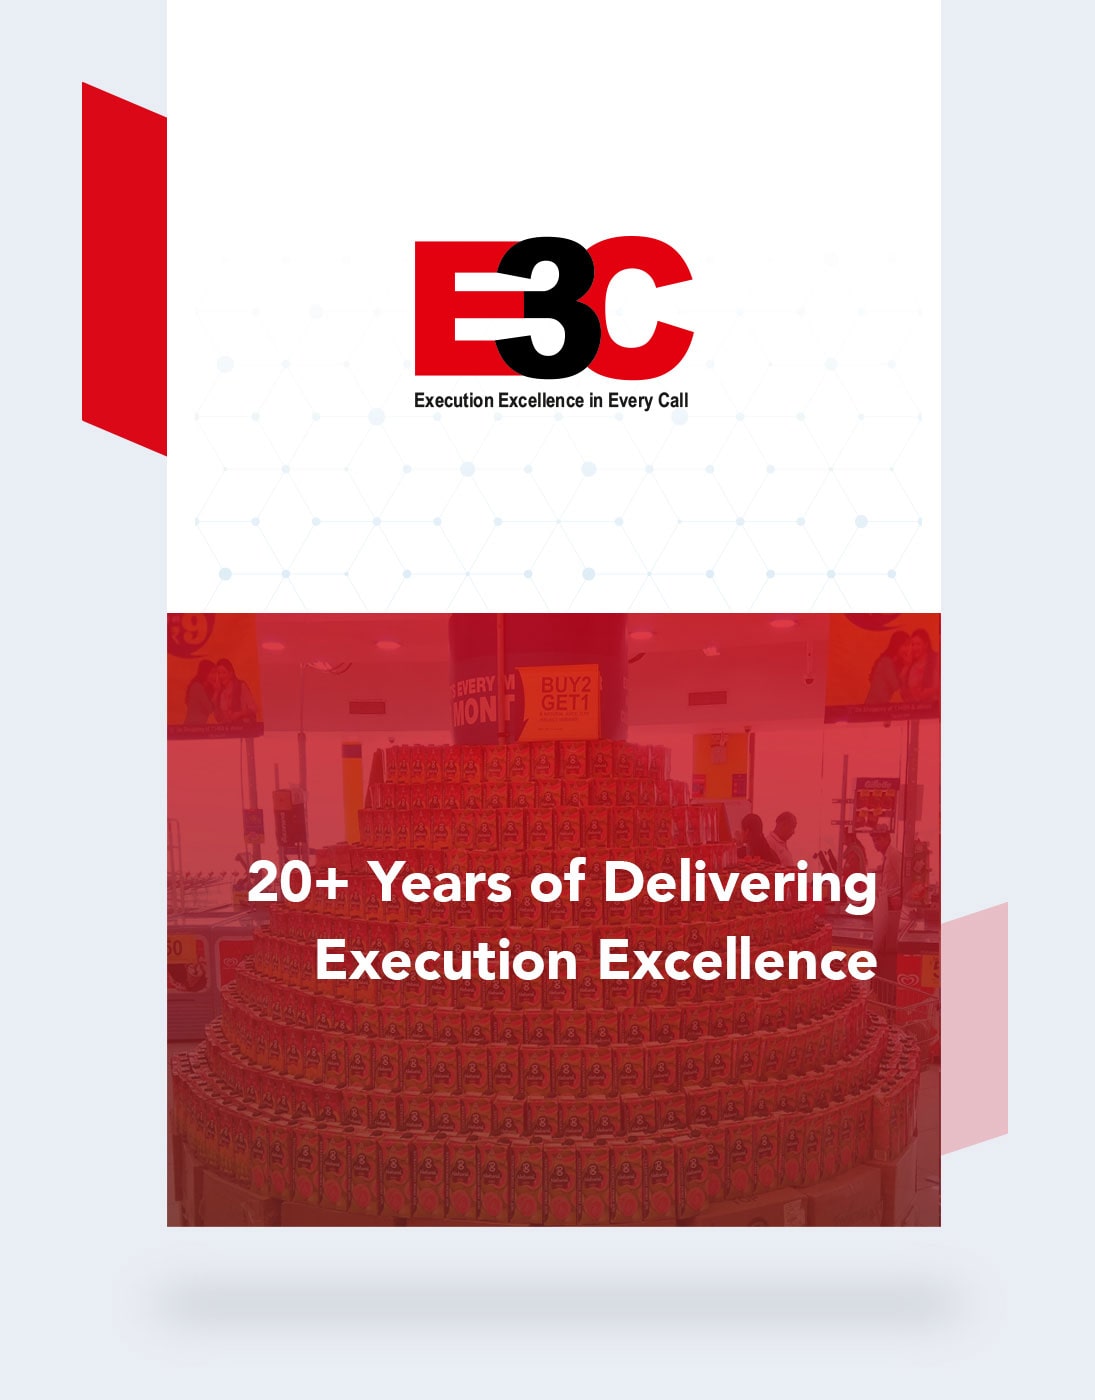 E3C Executive Excellence in Every Call: 20+Years of Delivering Executive Excellence